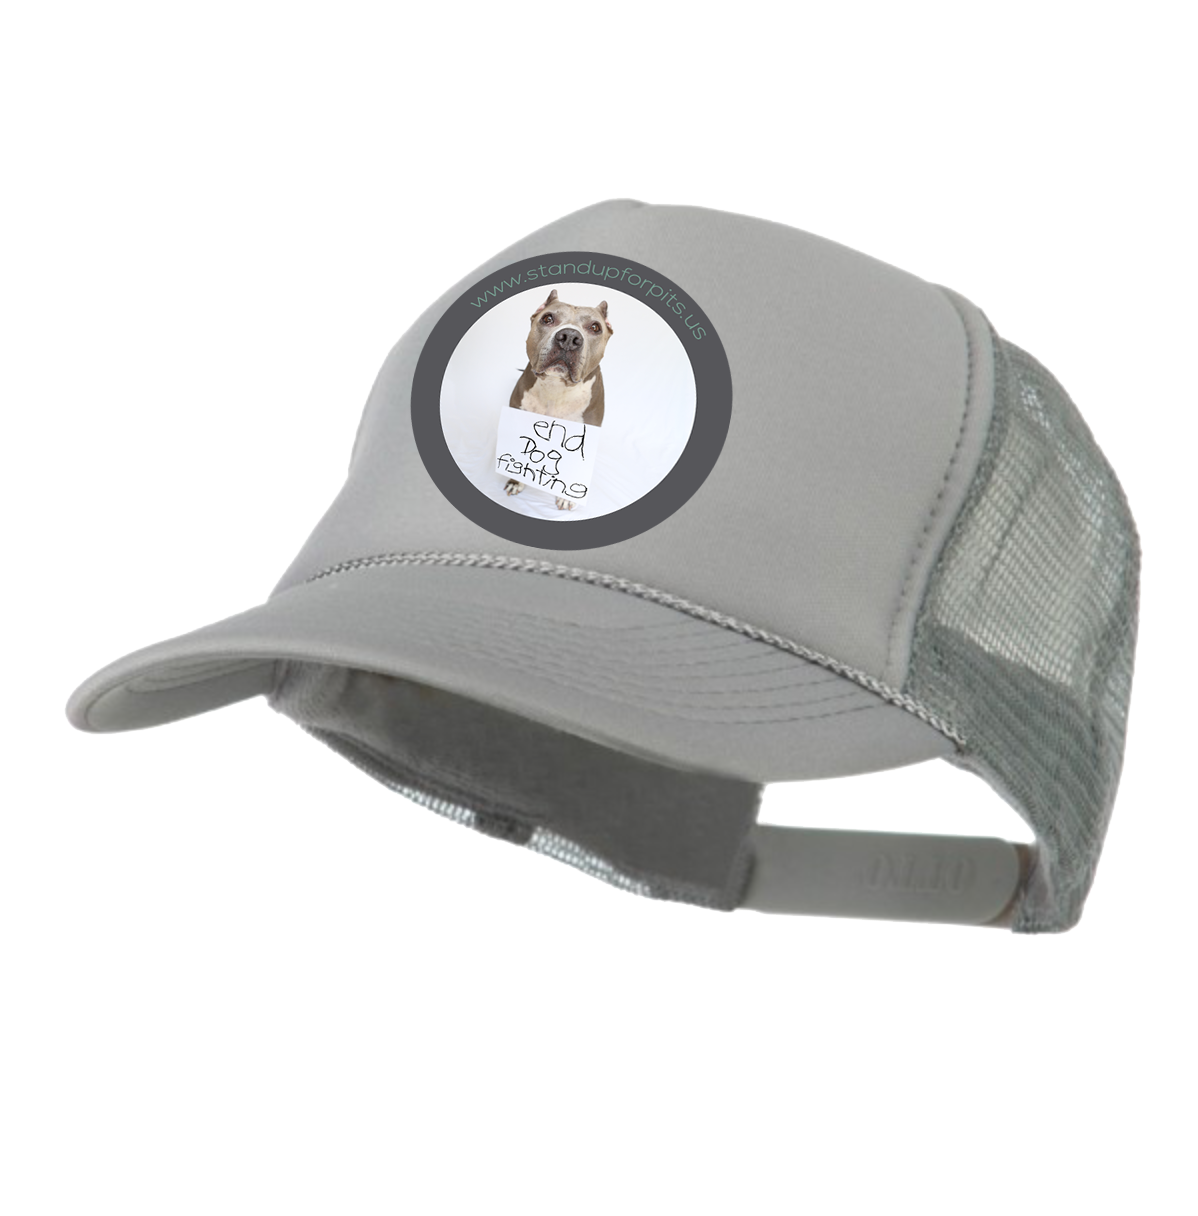 1 DAY left to get End Dogfighting hats!